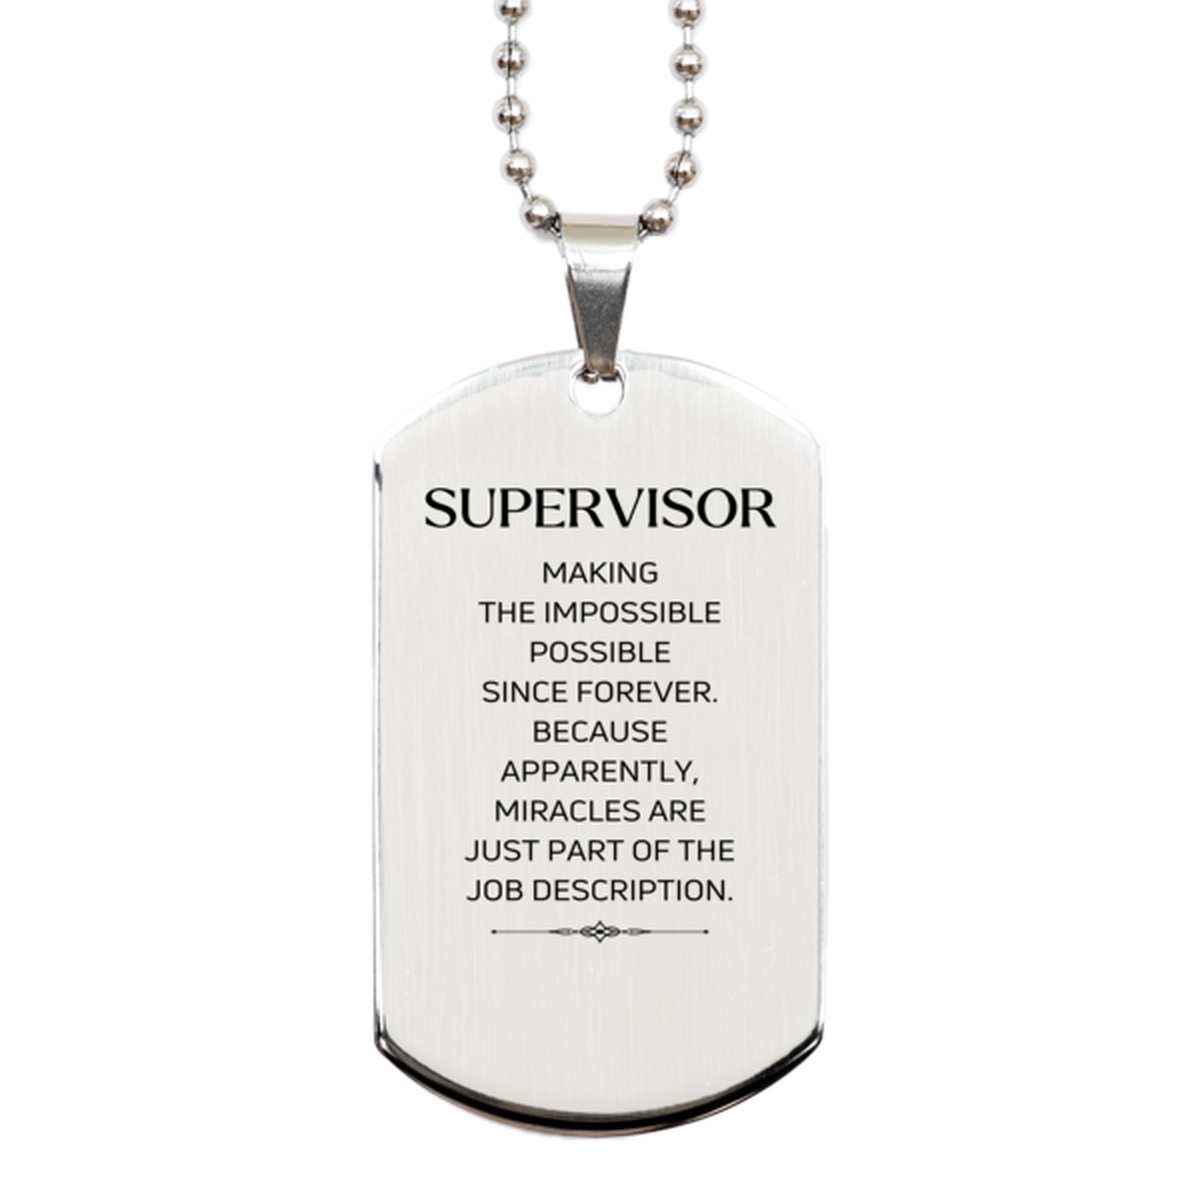 Funny Supervisor Gifts, Miracles are just part of the job description, Inspirational Birthday Silver Dog Tag For Supervisor, Men, Women, Coworkers, Friends, Boss